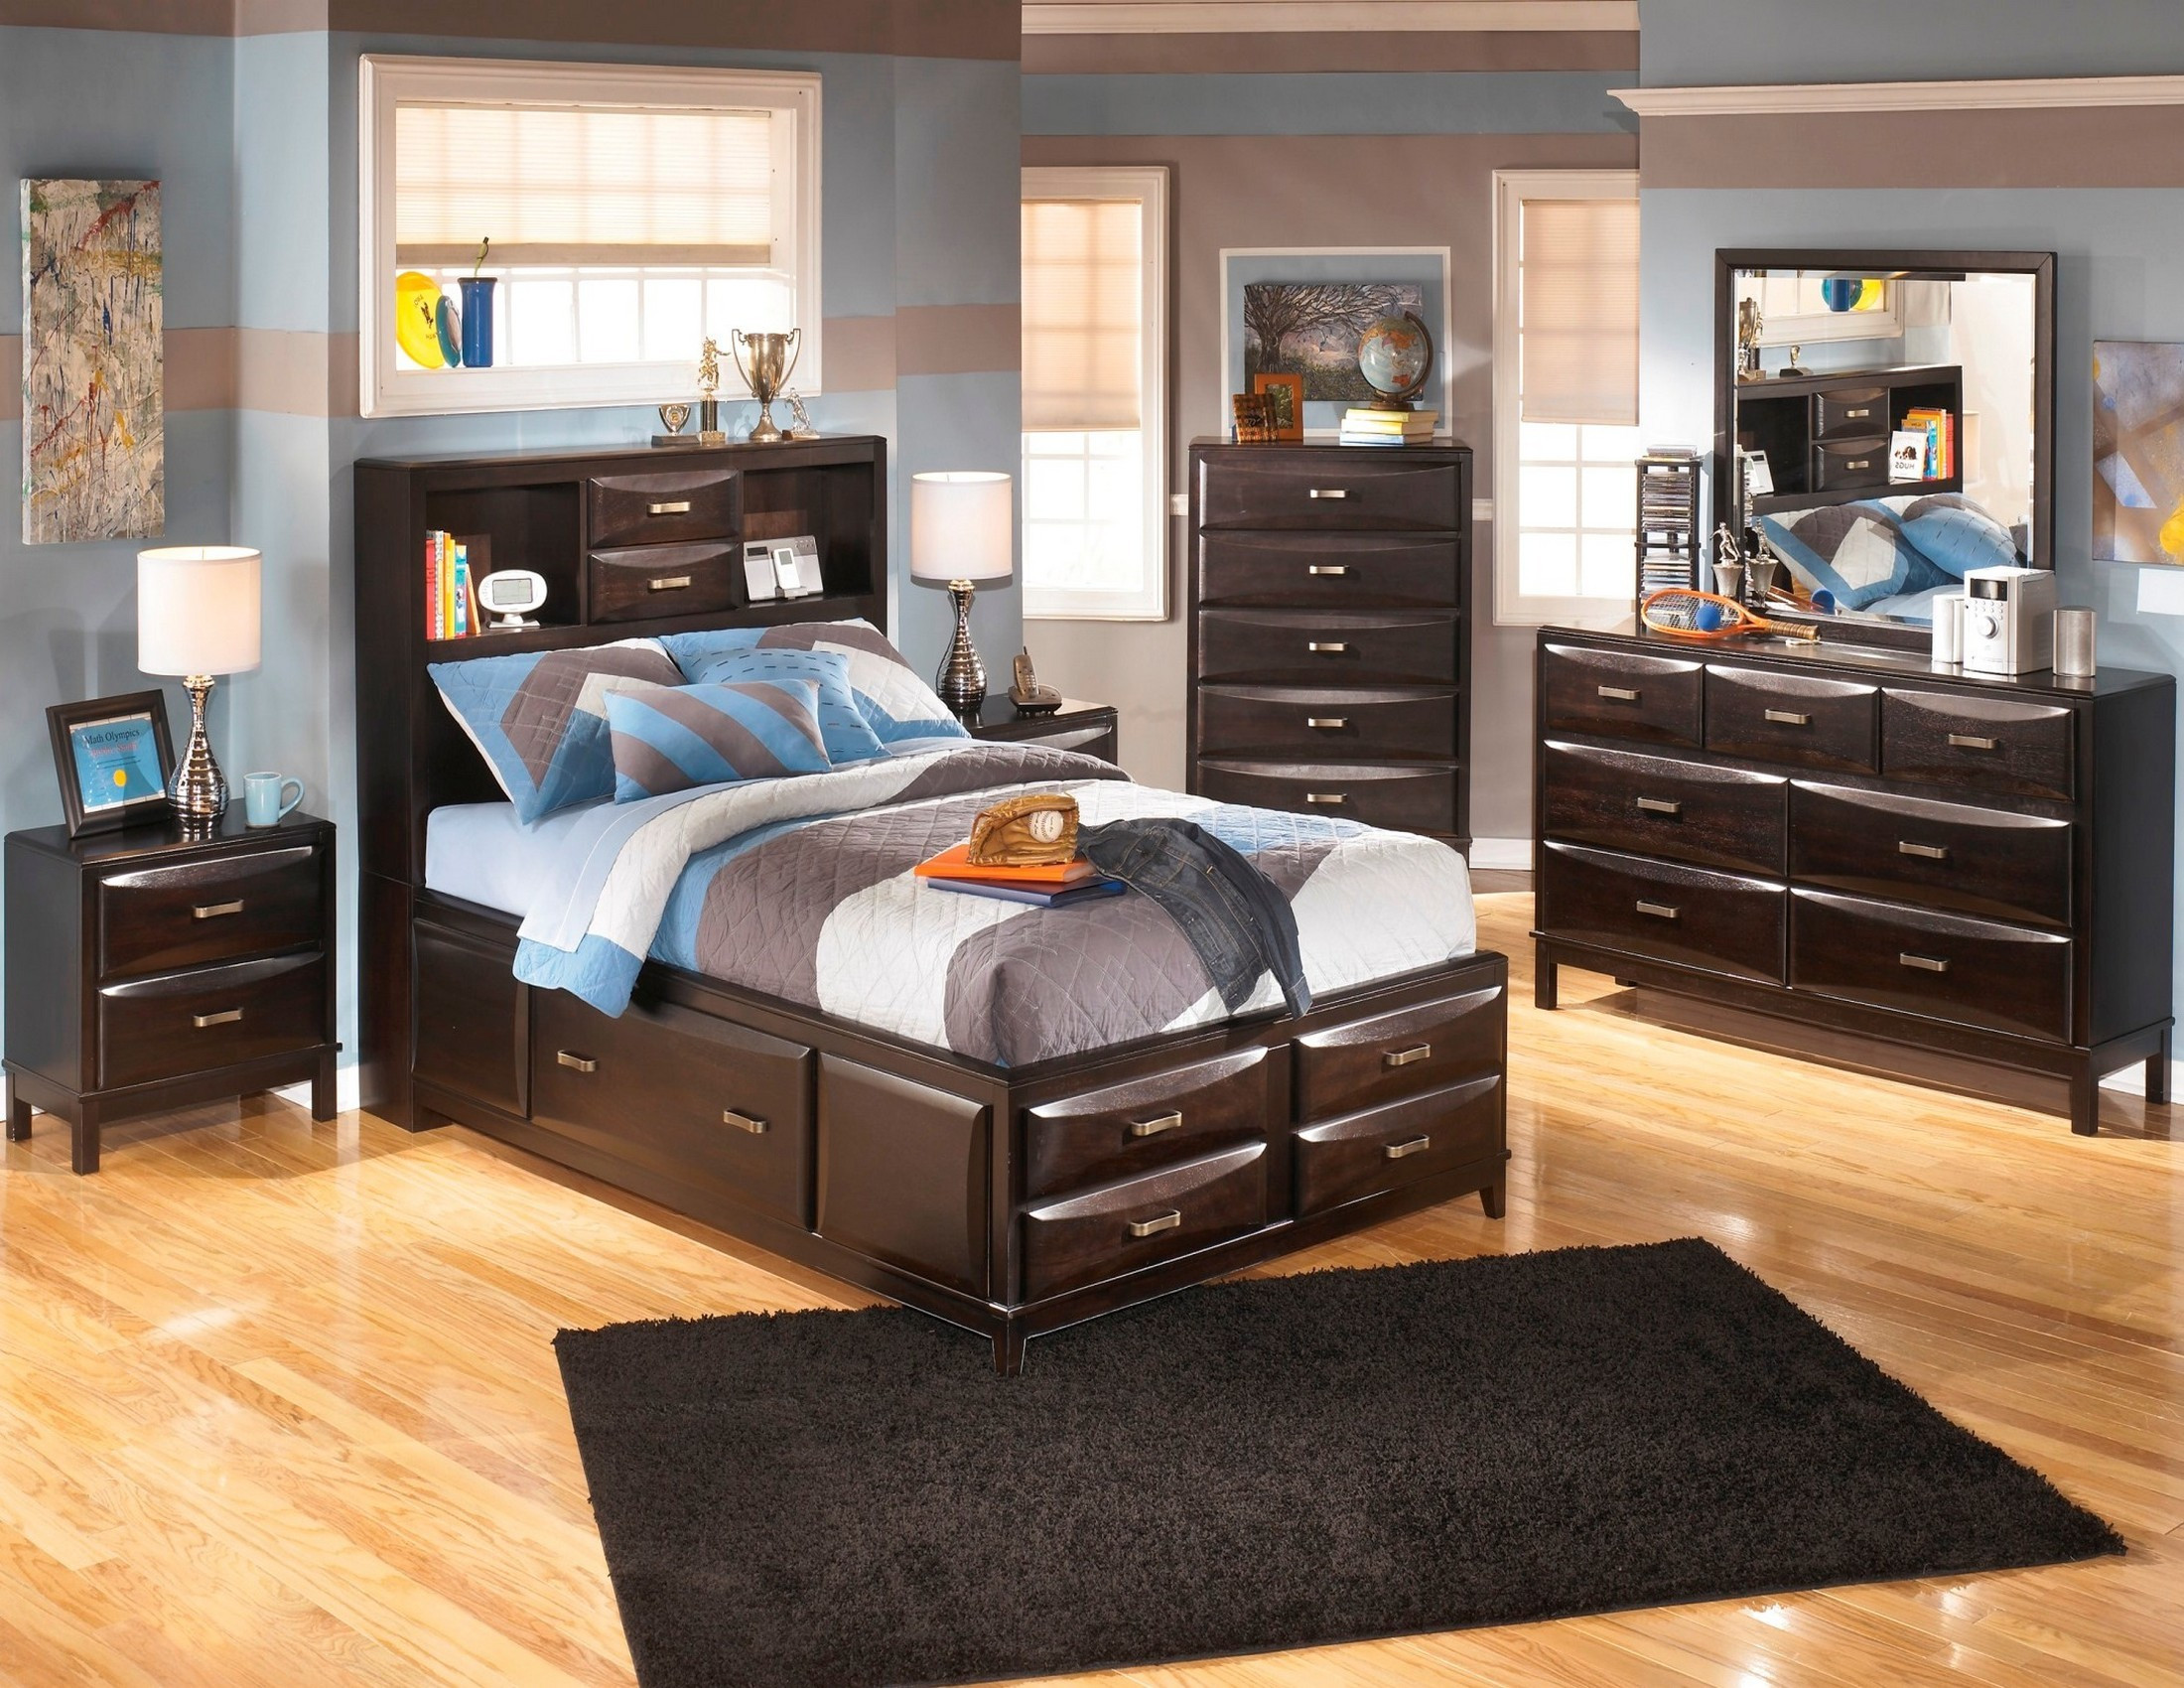 Bedroom Sets With Storage
 Kira Youth Storage Bedroom Set from Ashley B473